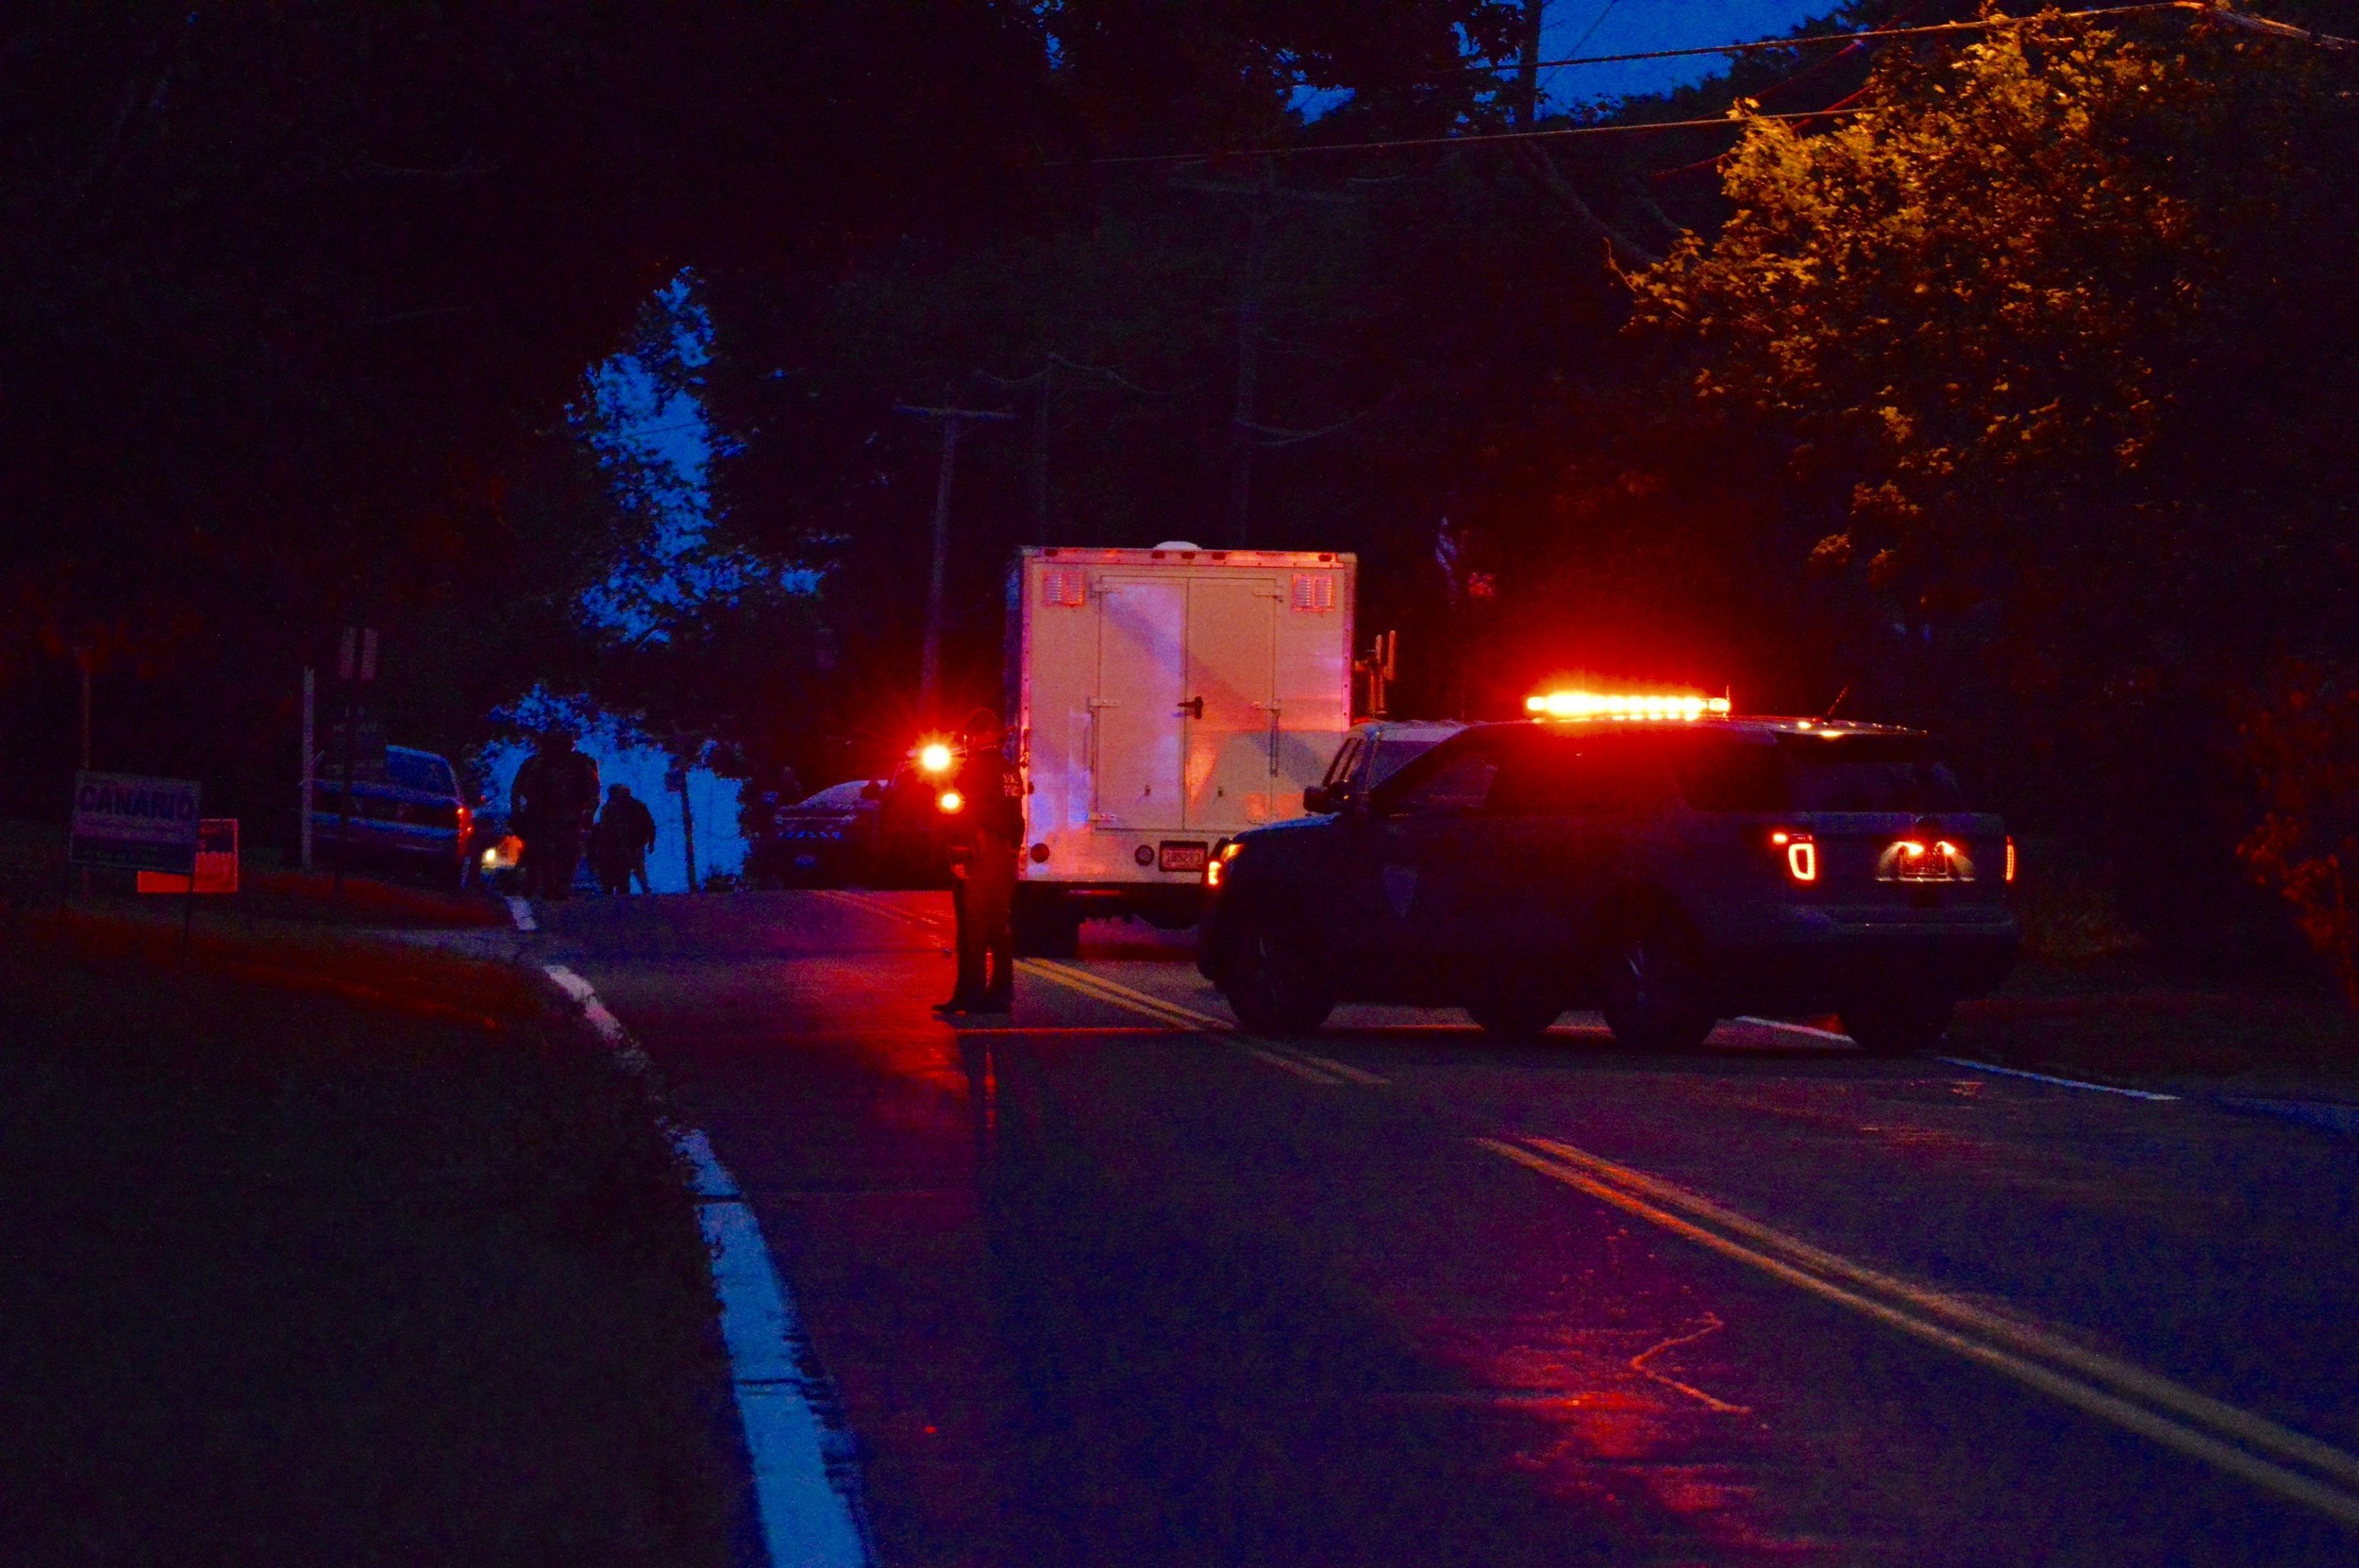 Police on the scene of a standoff with a Boyd's Lane man, shortly before it was resolved at 6:35 a.m. Monday.